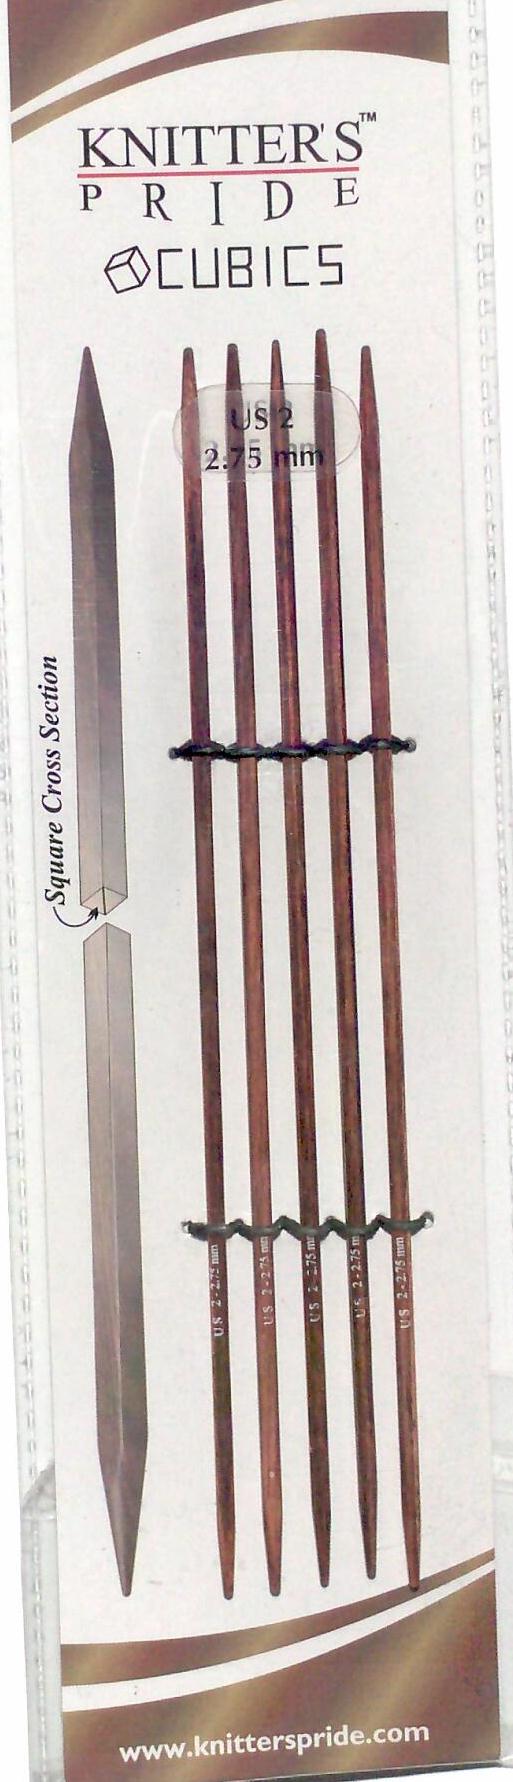 Knitter's Pride 06"/15 cm 3.75 mm/US 5 Rosewood Cubics Double Point Needles